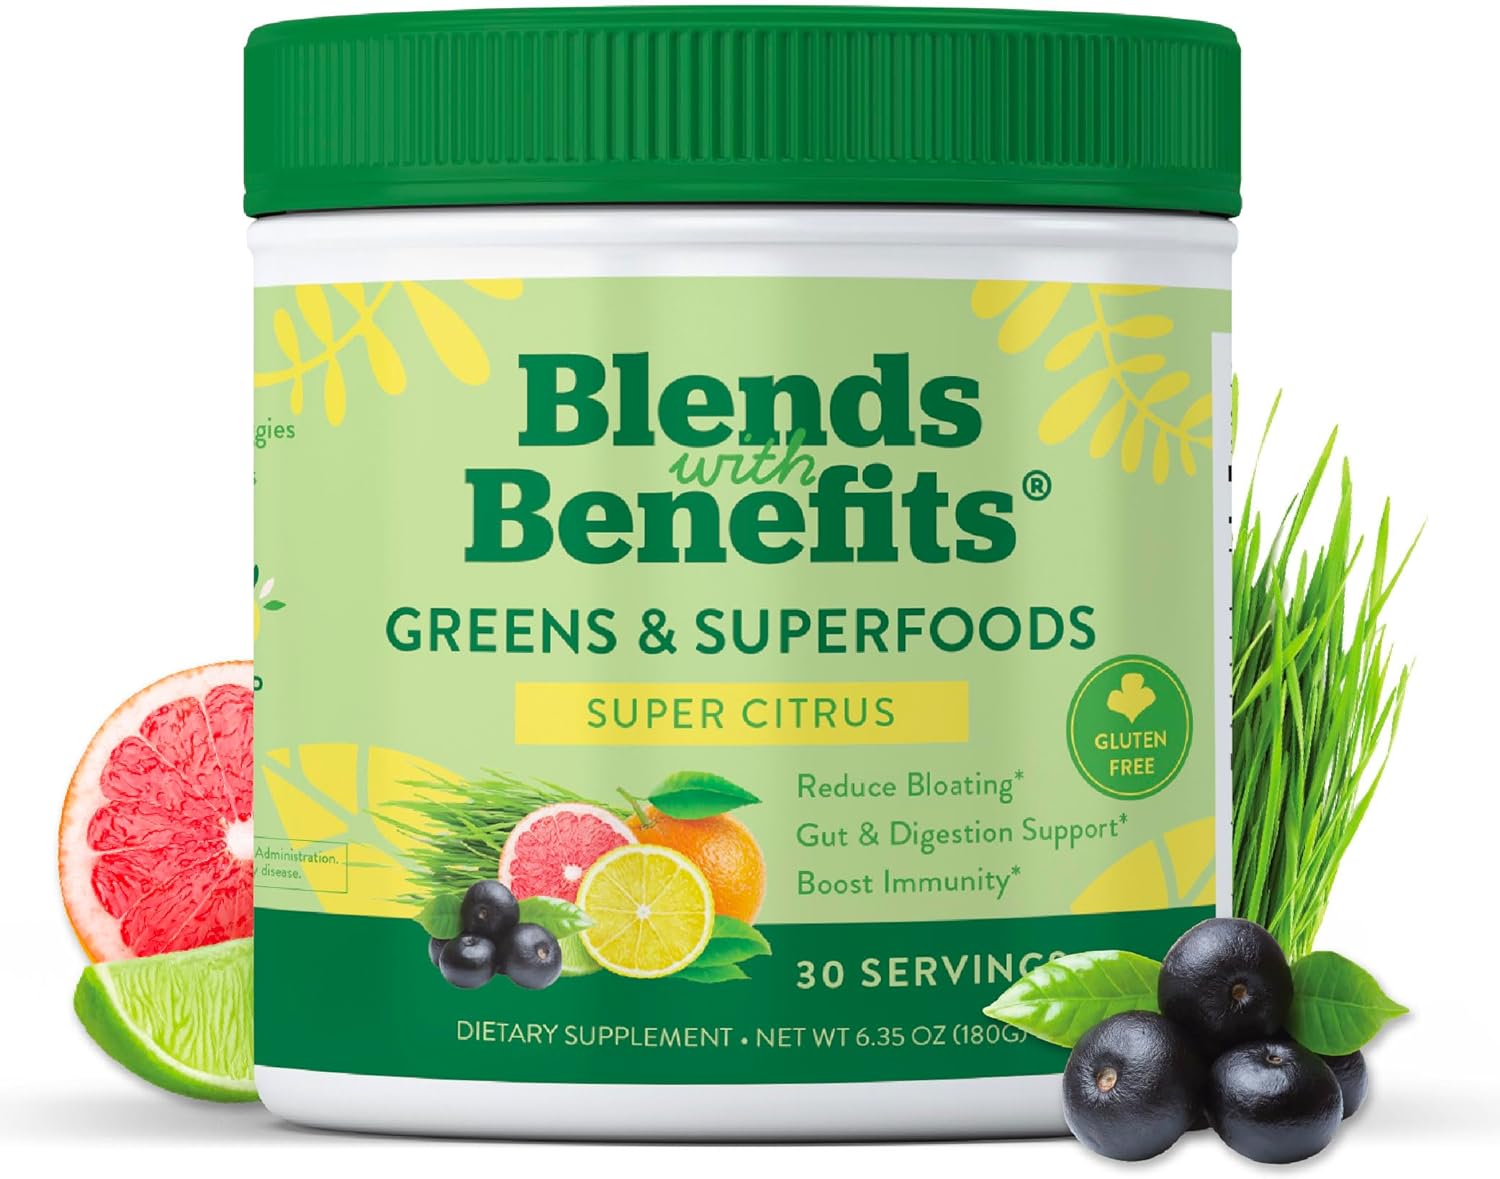 360 Nutrition Blends with Benefits Super Greens Powder w/Probiotics, Digestive Enzymes, Sugar Gluten Free, Plant Based Superfood Drink Mix for Gut Health, Bloating, Immunity, Overall Health, 6.35 oz